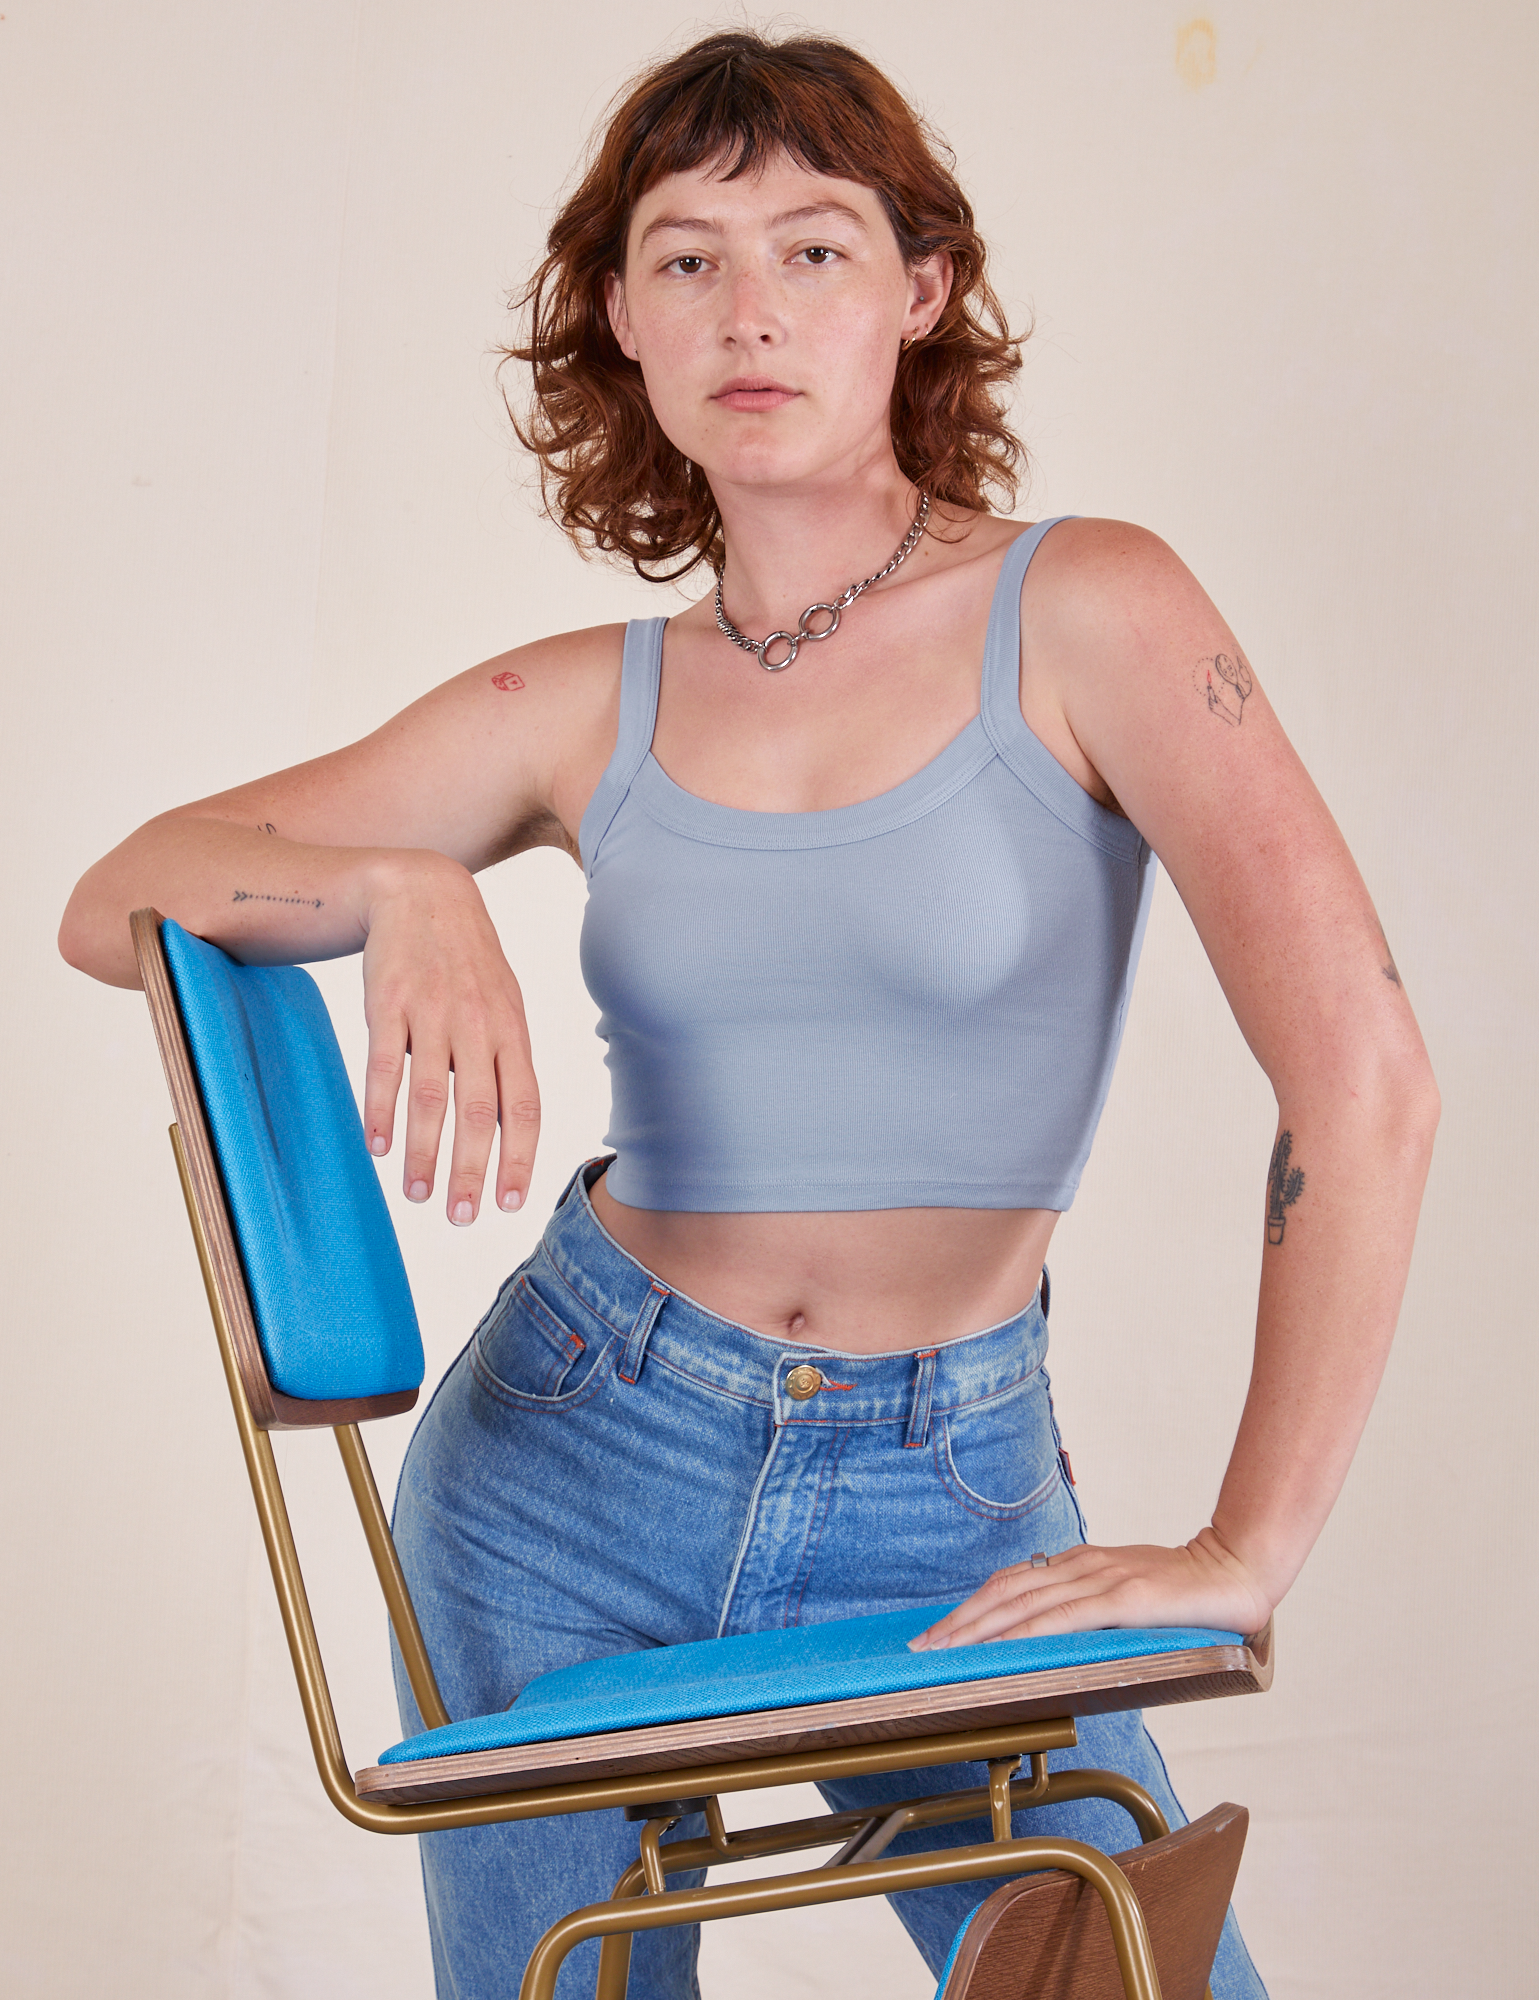 Alex is 5'8" and wearing P Cropped Cami in Periwinkle. There are two blue and brass vintage chairs stacked on top of each other. Alex has her elbow on the top back of one chair and the other hand on the seat.